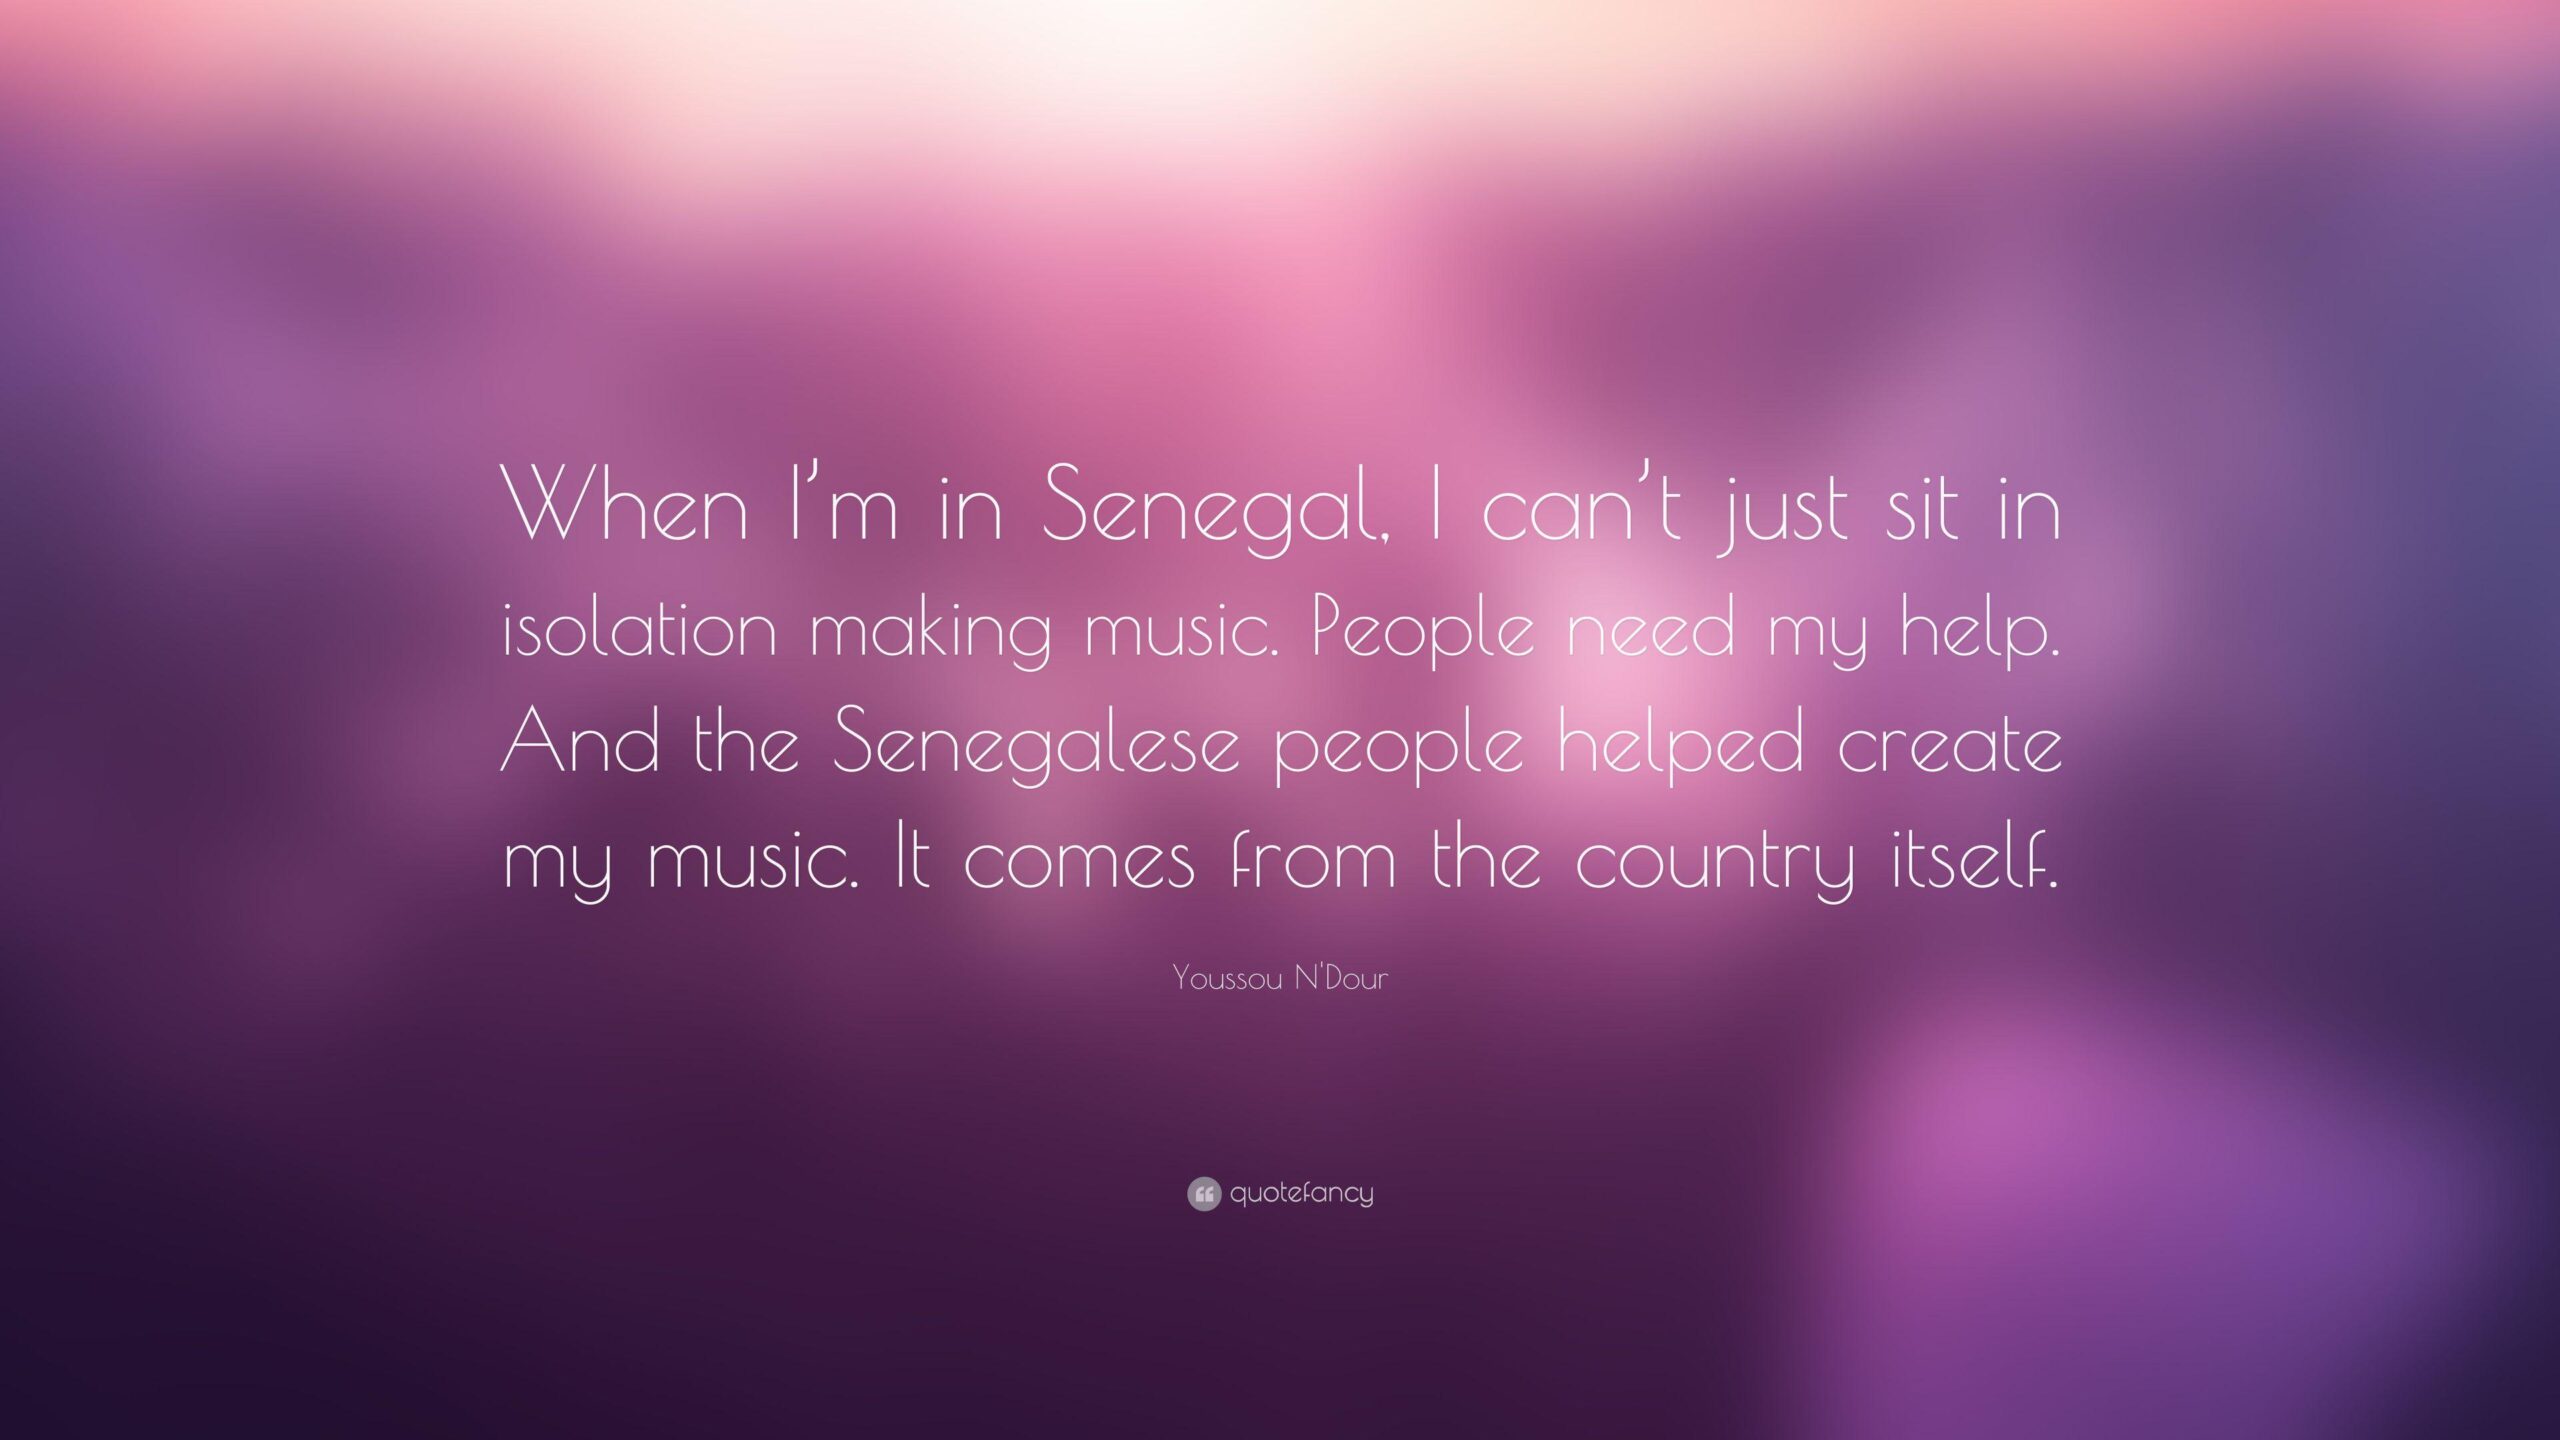 Youssou N’Dour Quote “When I’m in Senegal, I can’t just sit in